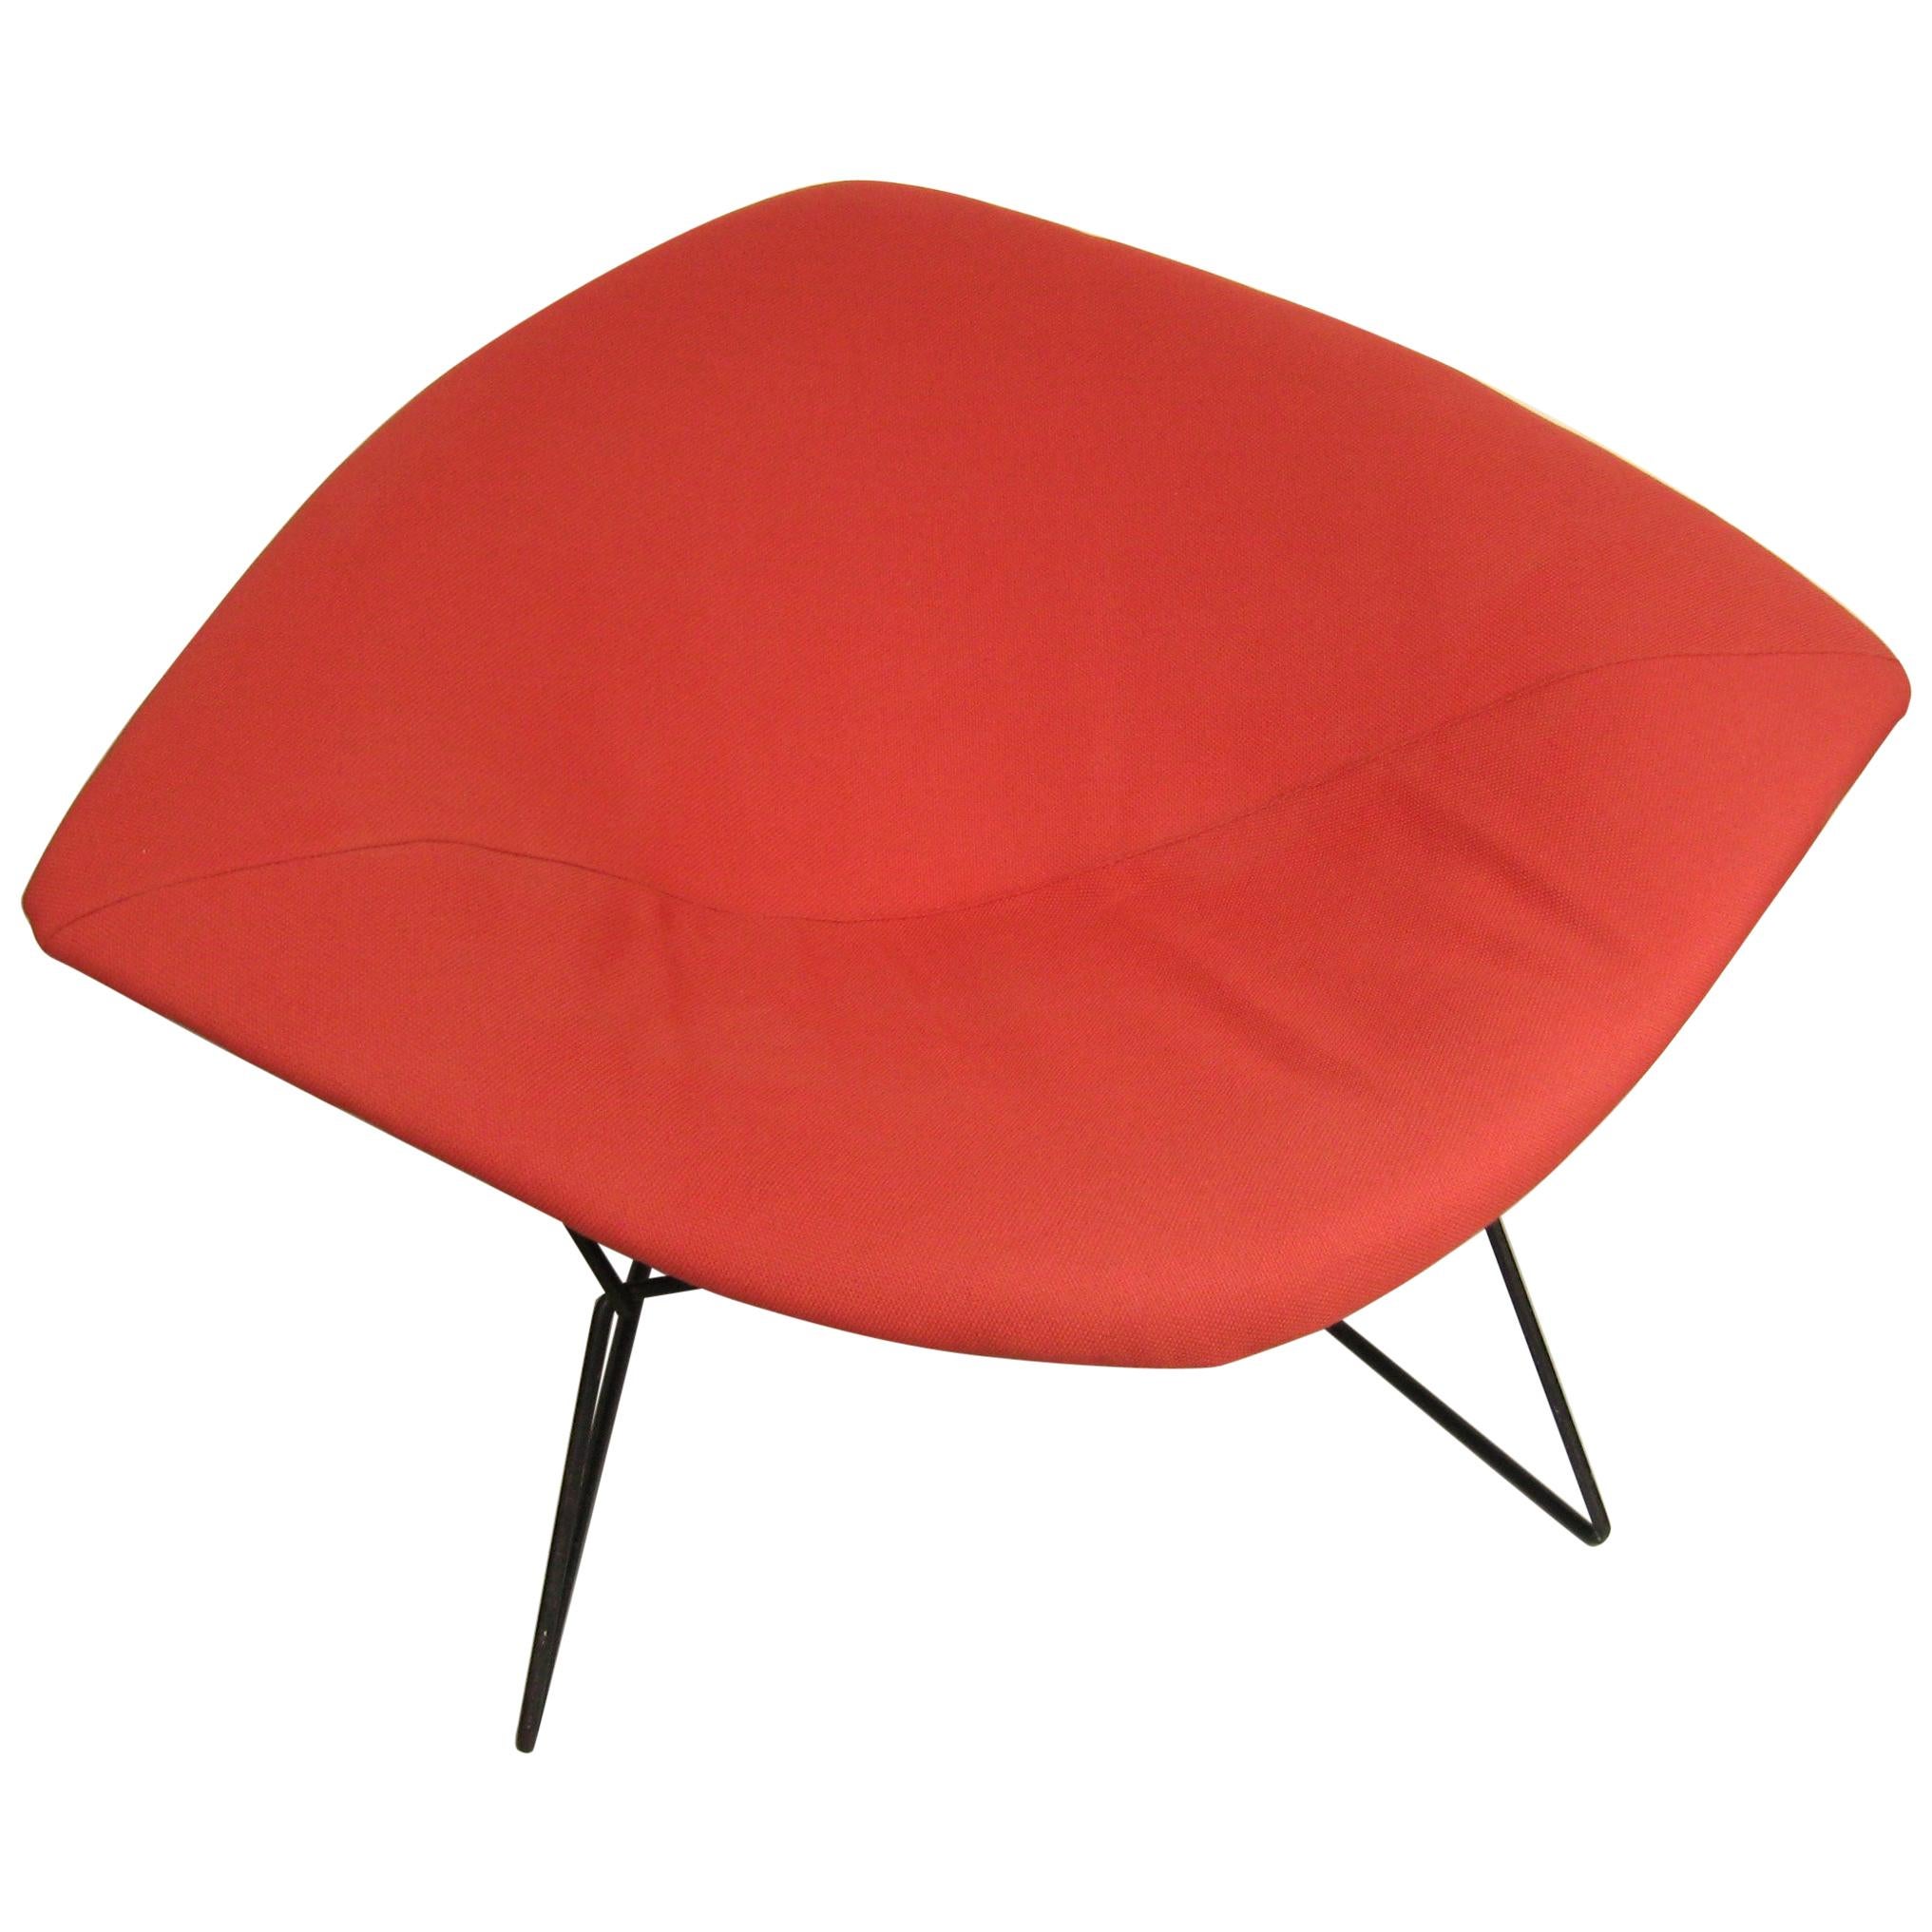 Harry Bertoia for Knoll Red Diamond Chair, 1960s For Sale